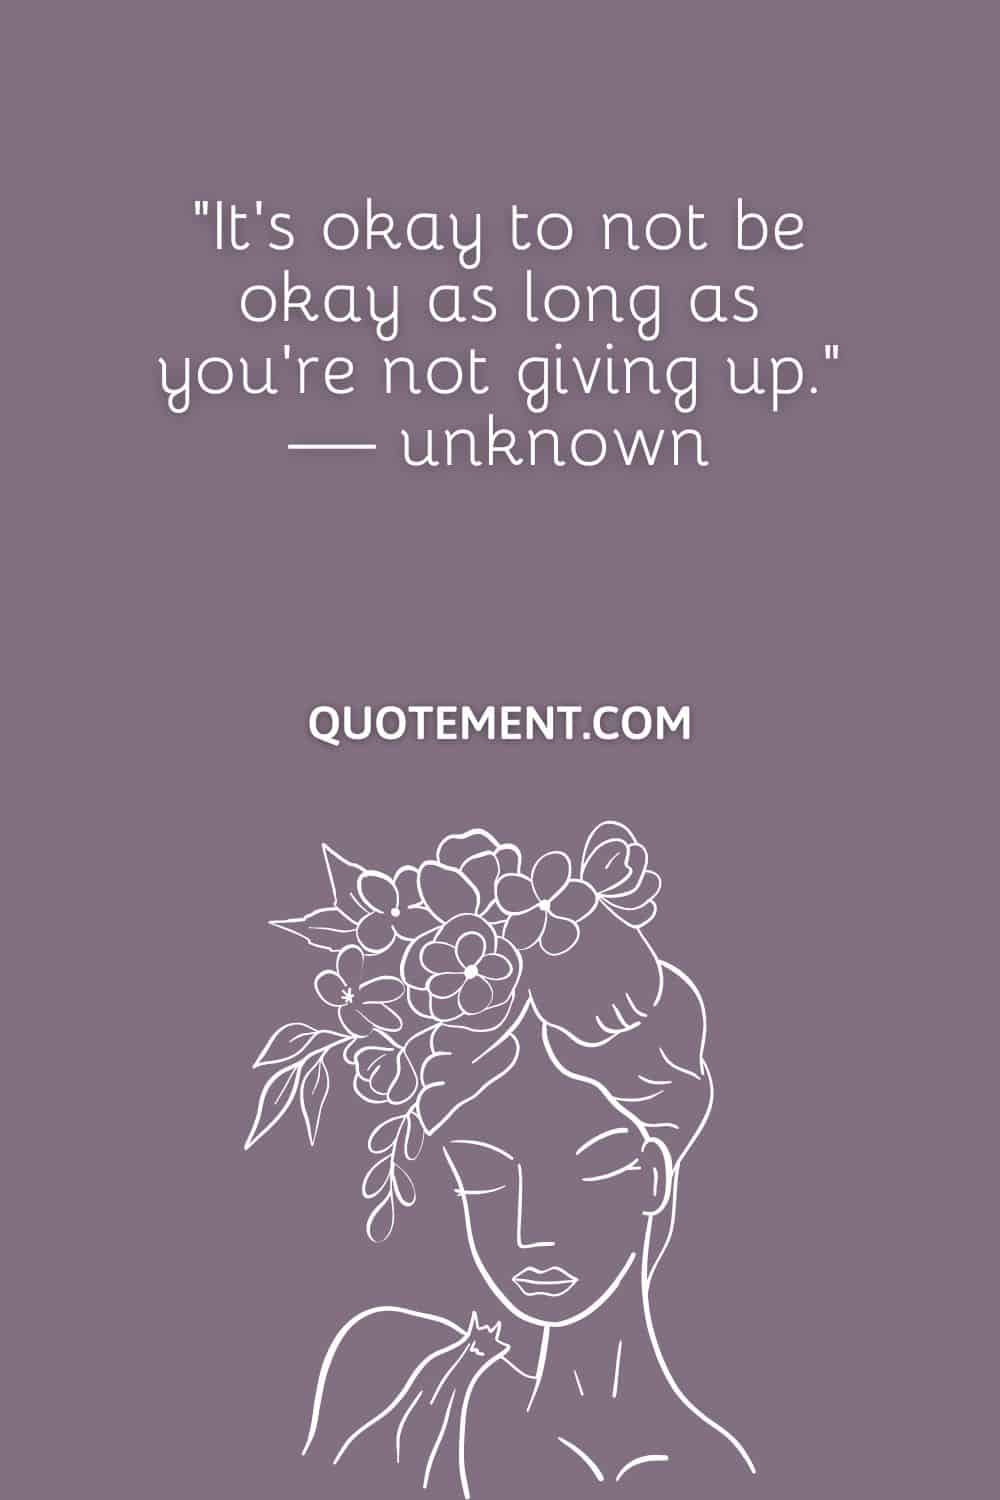 It’s okay to not be okay as long as you’re not giving up